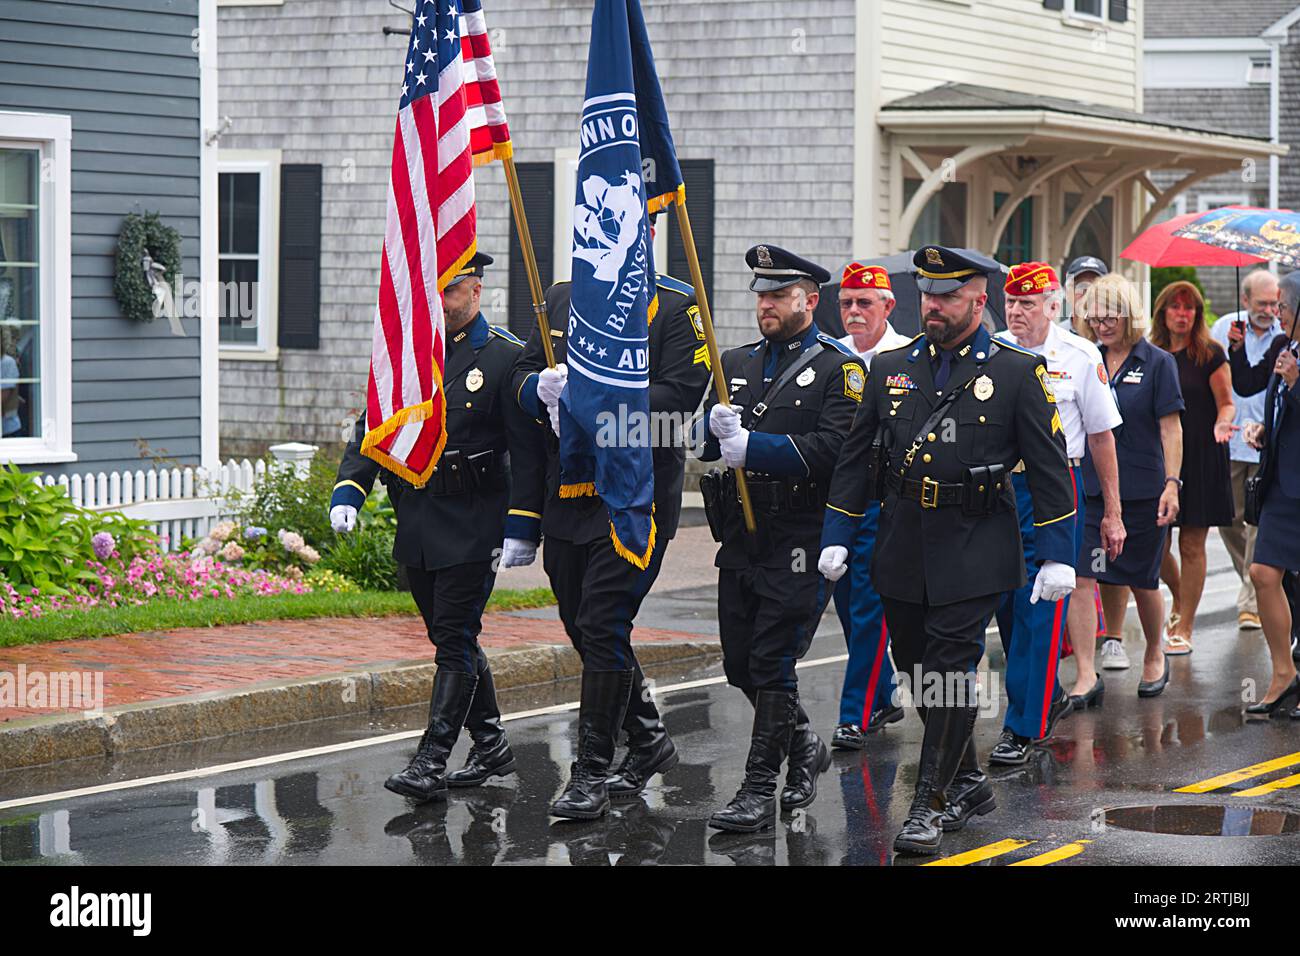 911 commemoration ceremony at Barnstable, MA Fire Headquarters on Cape Cod, USA. The procession marches though the Village. Stock Photo